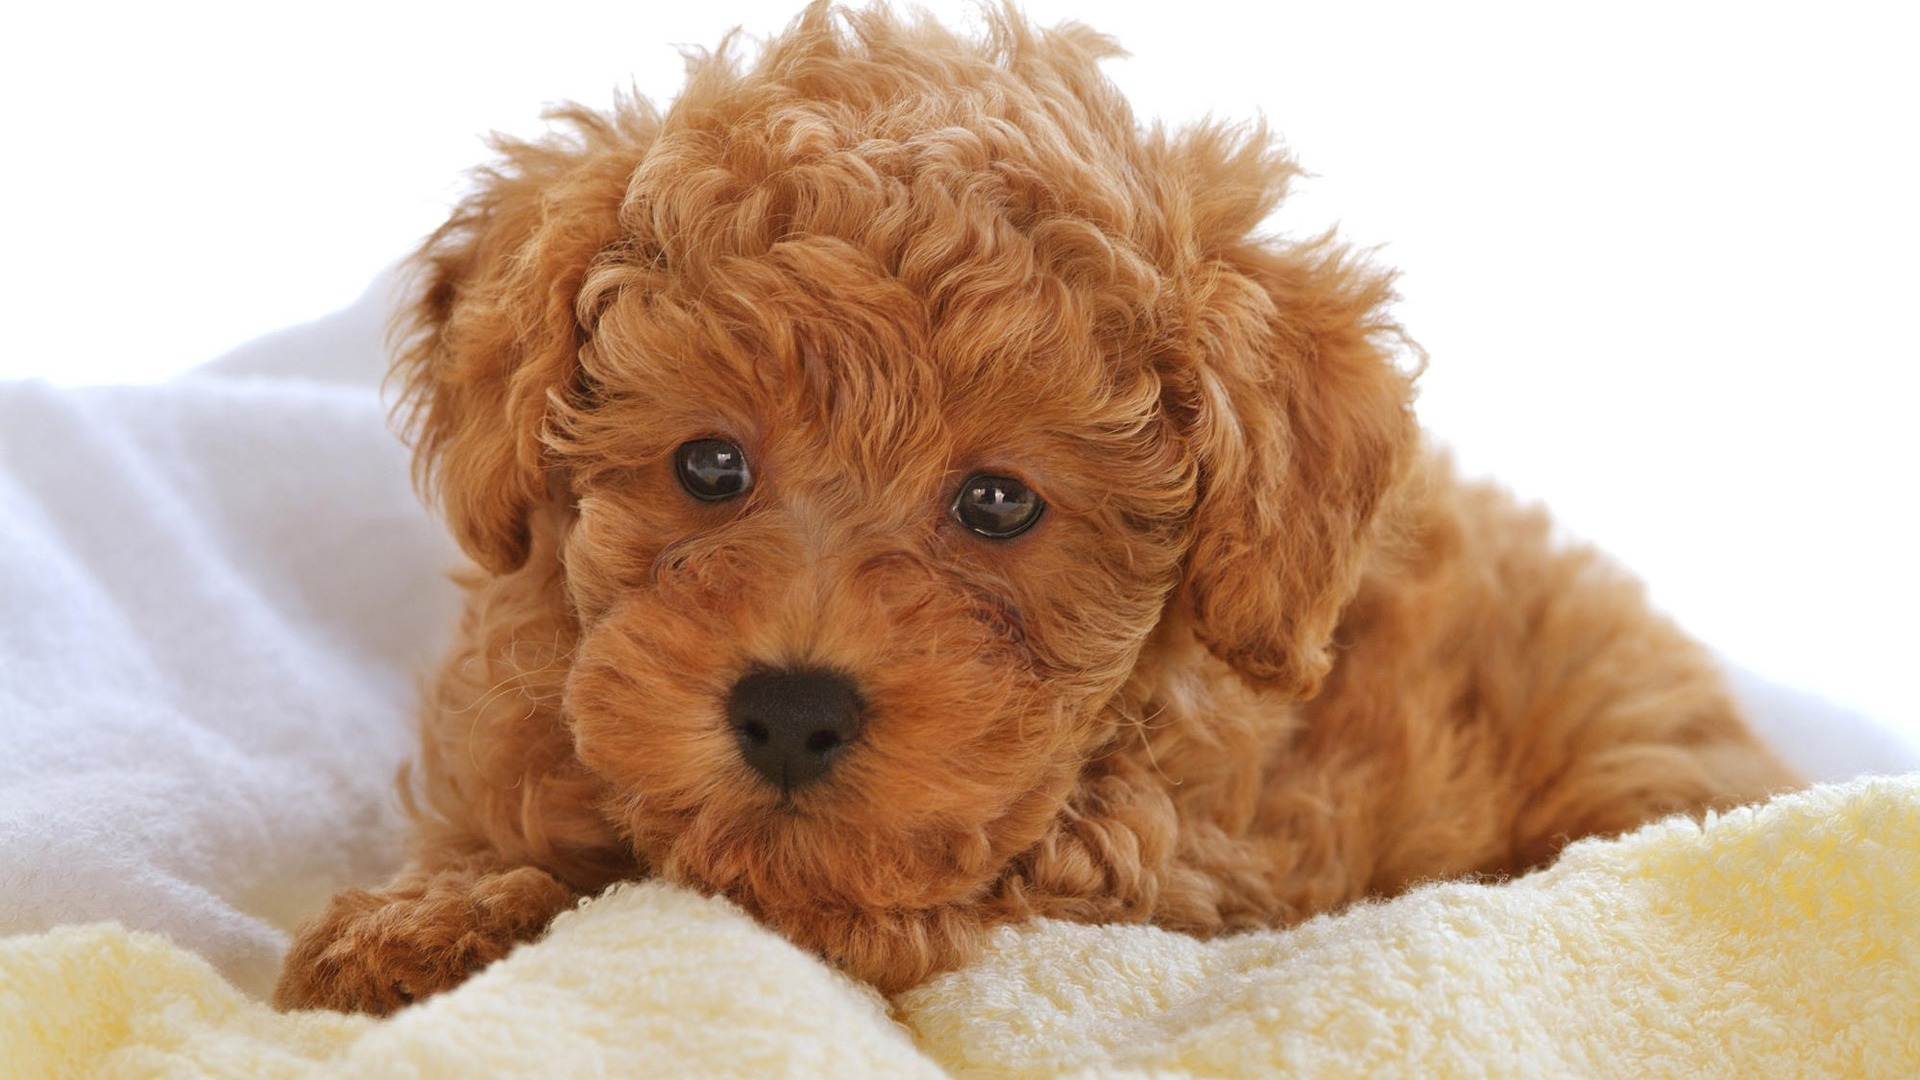 Puppy Photo HD wallpapers (10) #19 - 1920x1080